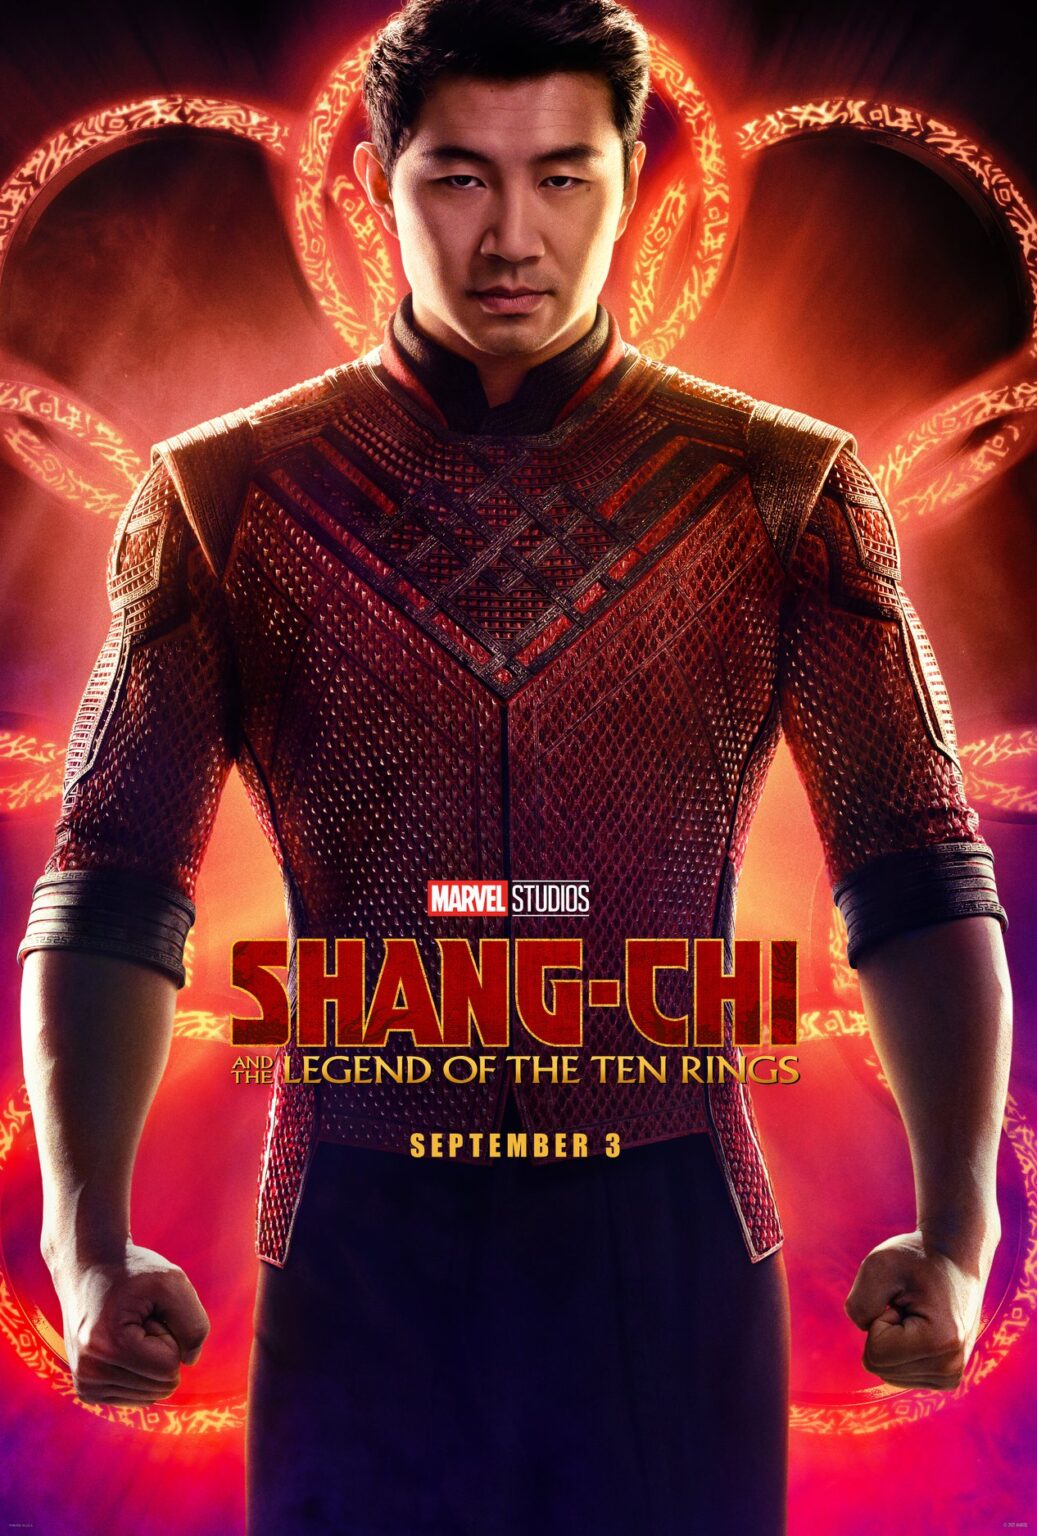 Trailer and Movie Poster: Shang-Chi and the Legend of the Ten Rings